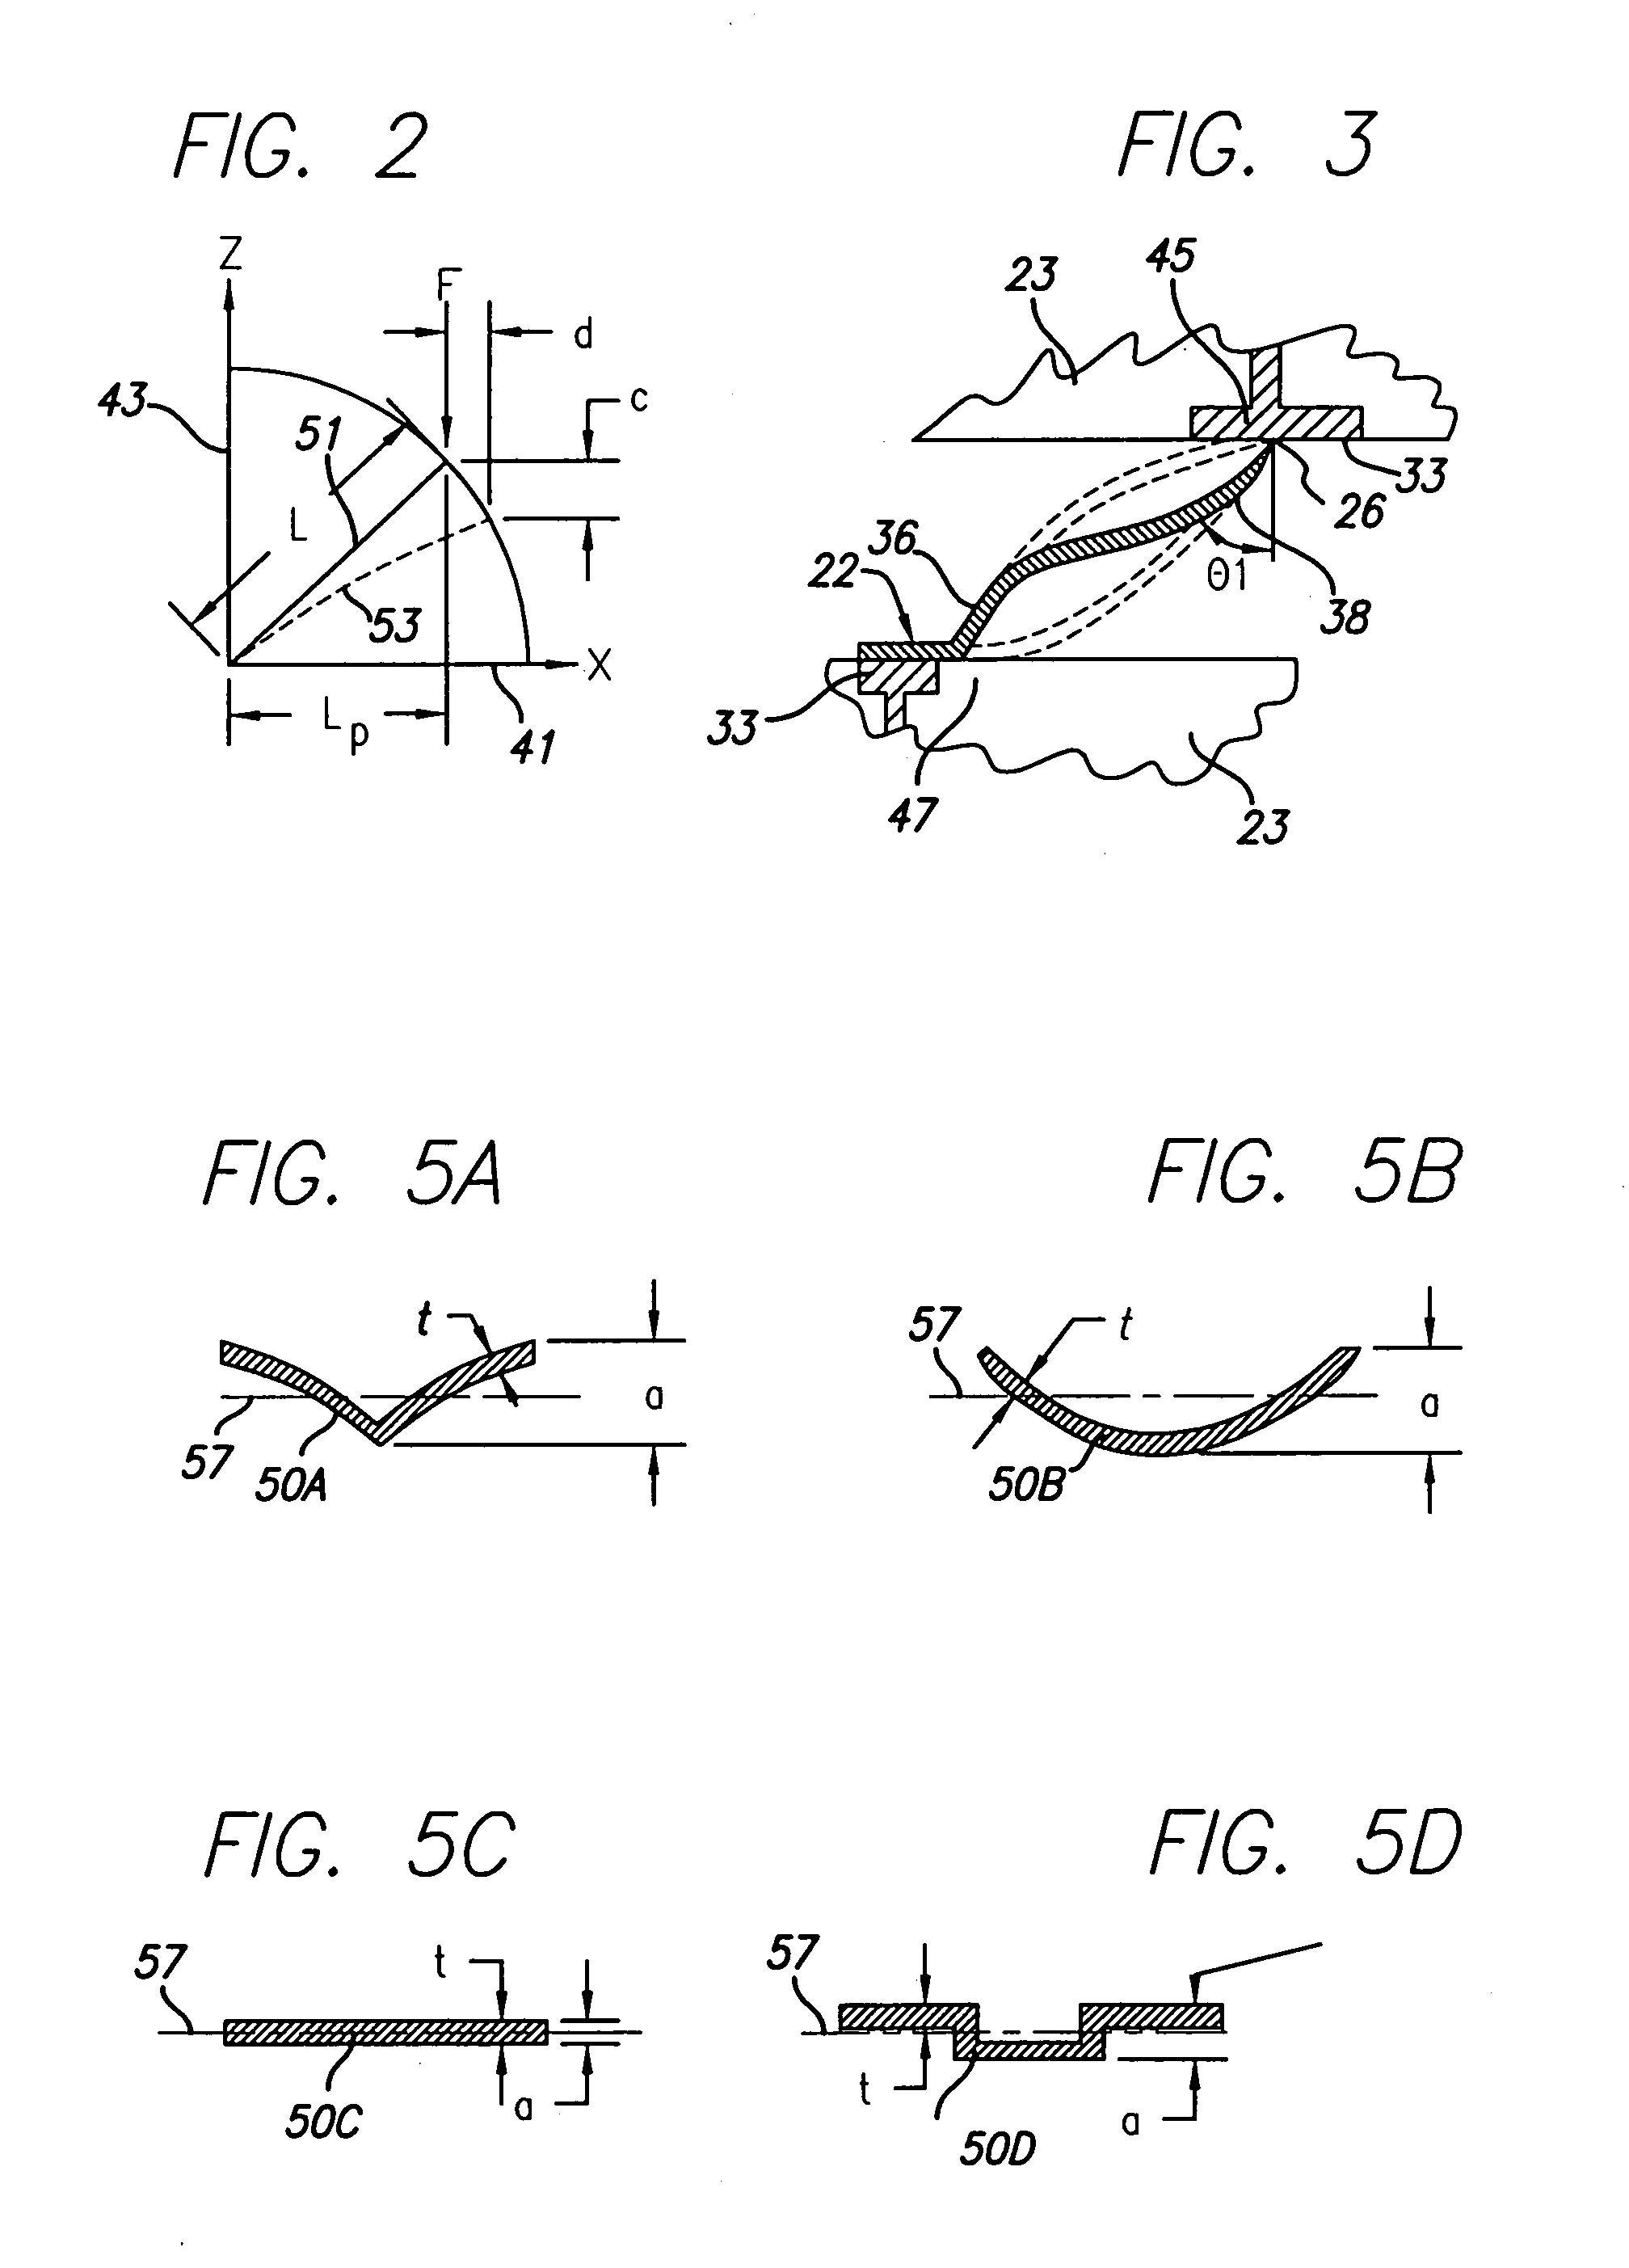 Lithographic type microelectronic spring structures with improved contours